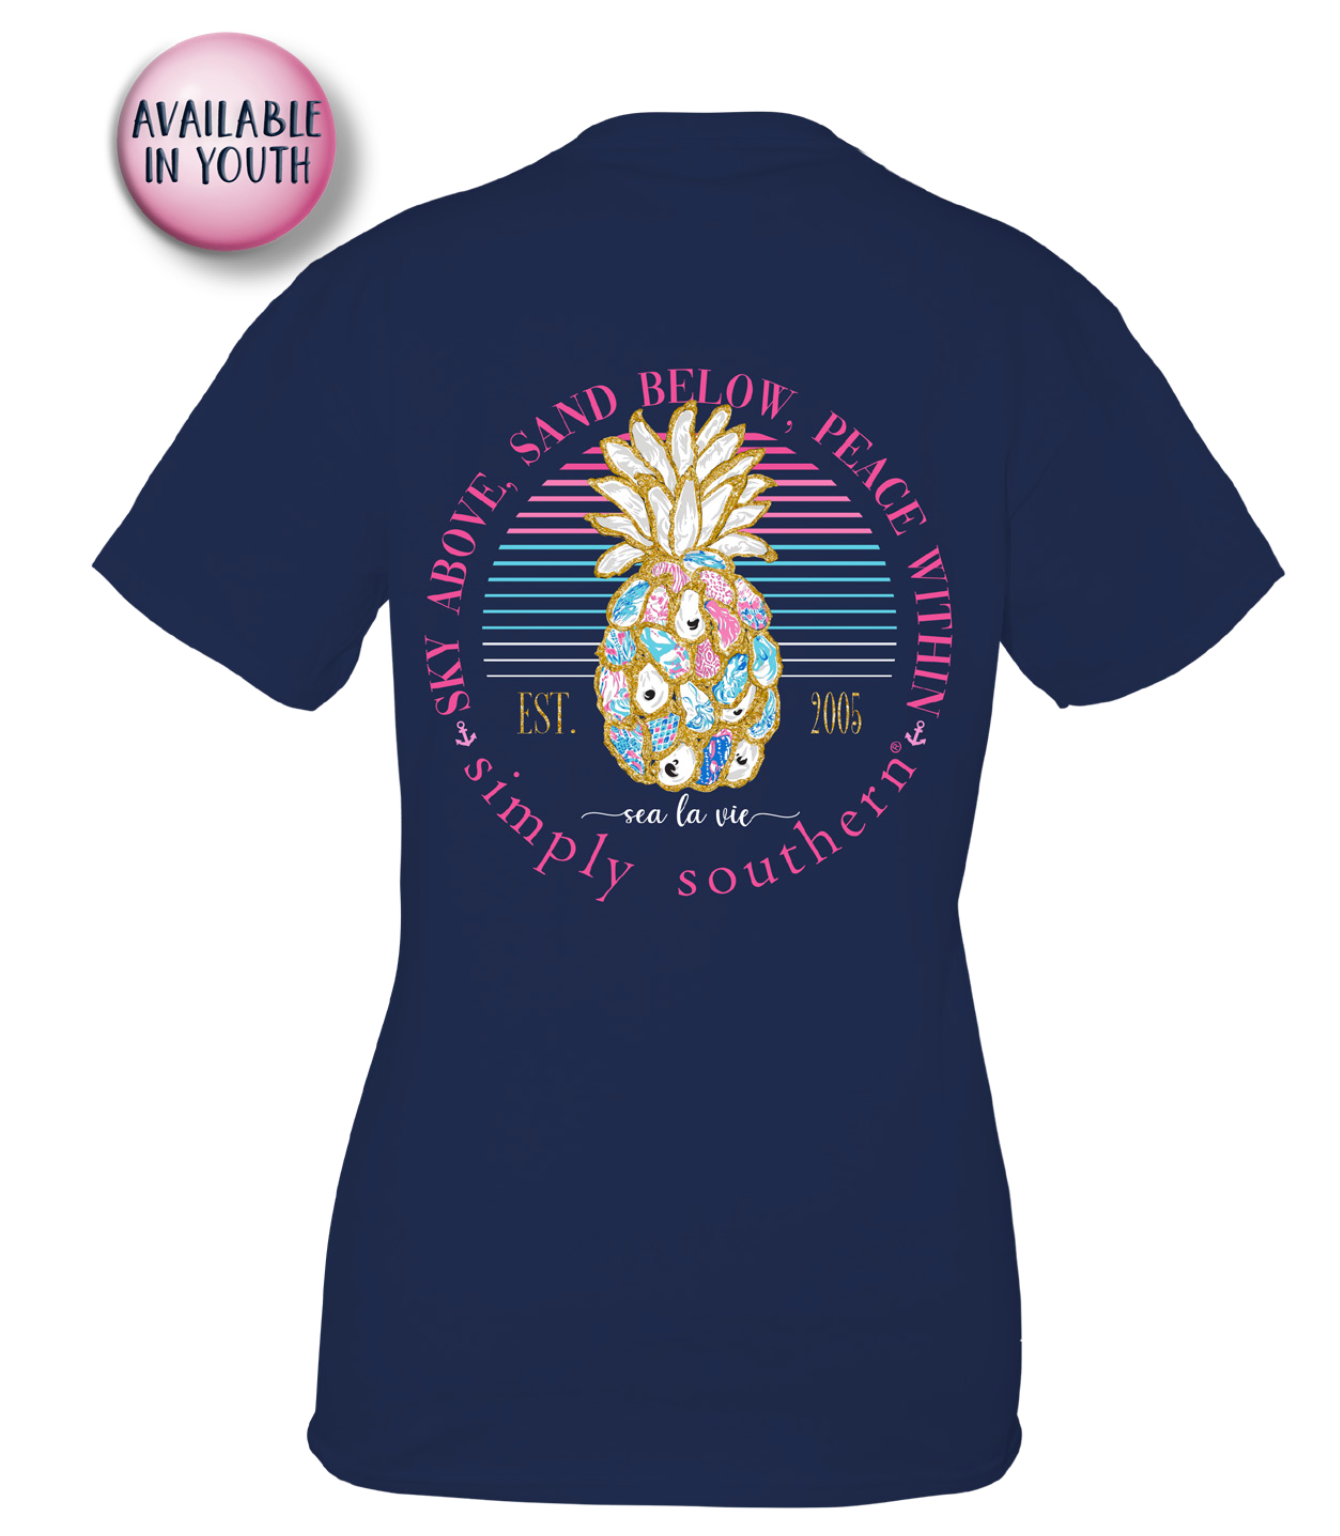 Youth 'Sky Above, Sand Below, Peace Within' Short Sleeve Tee by Simply Southern